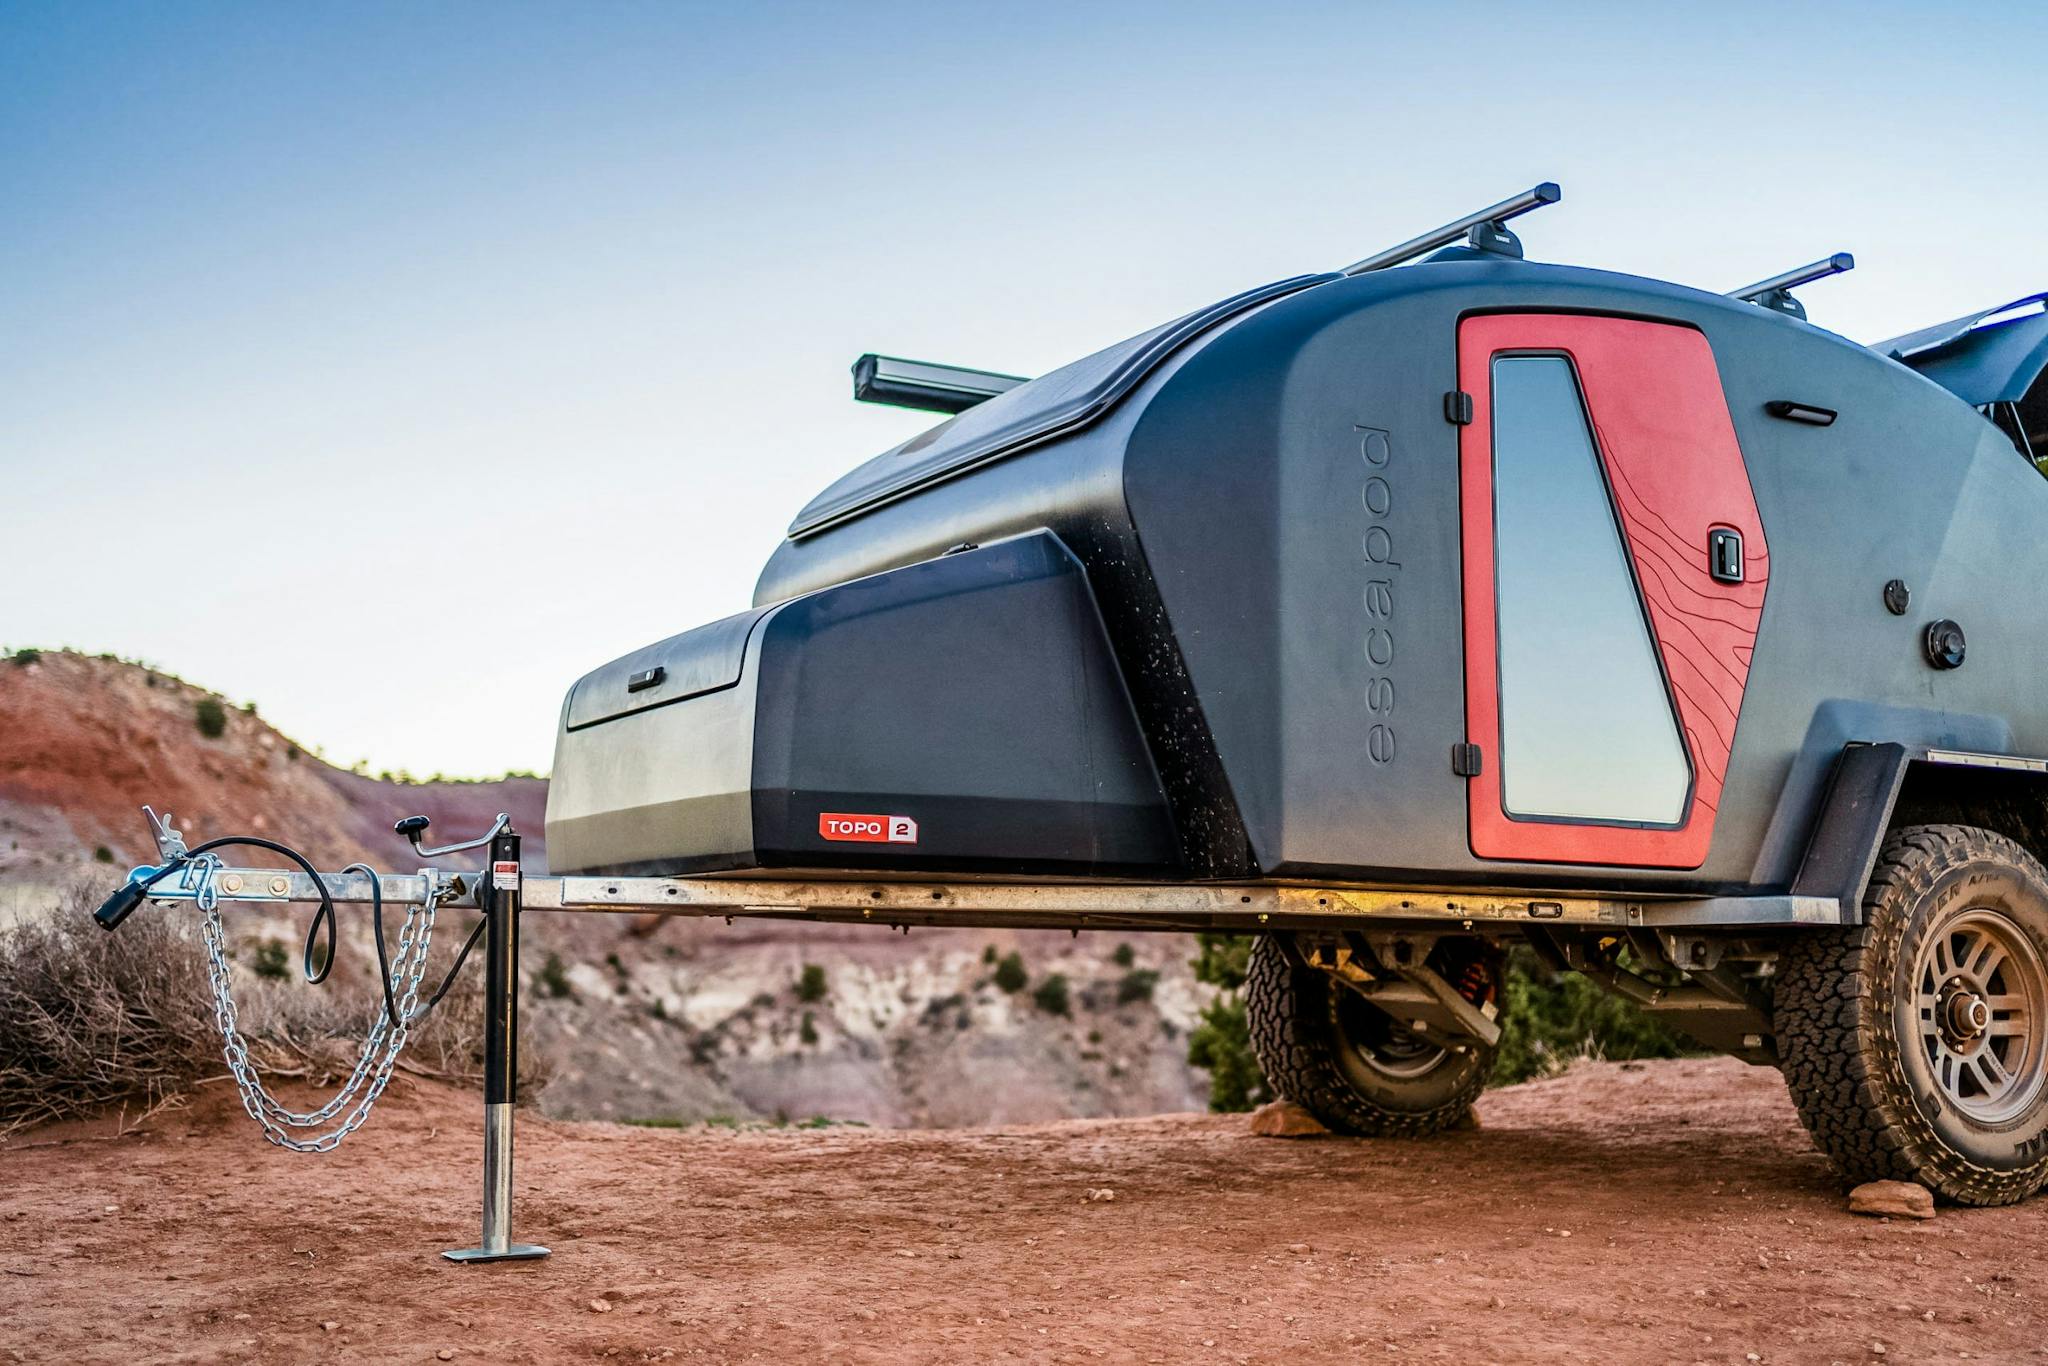 A navy blue teardrop trailer with a red door set up in a desert landscape for camping.